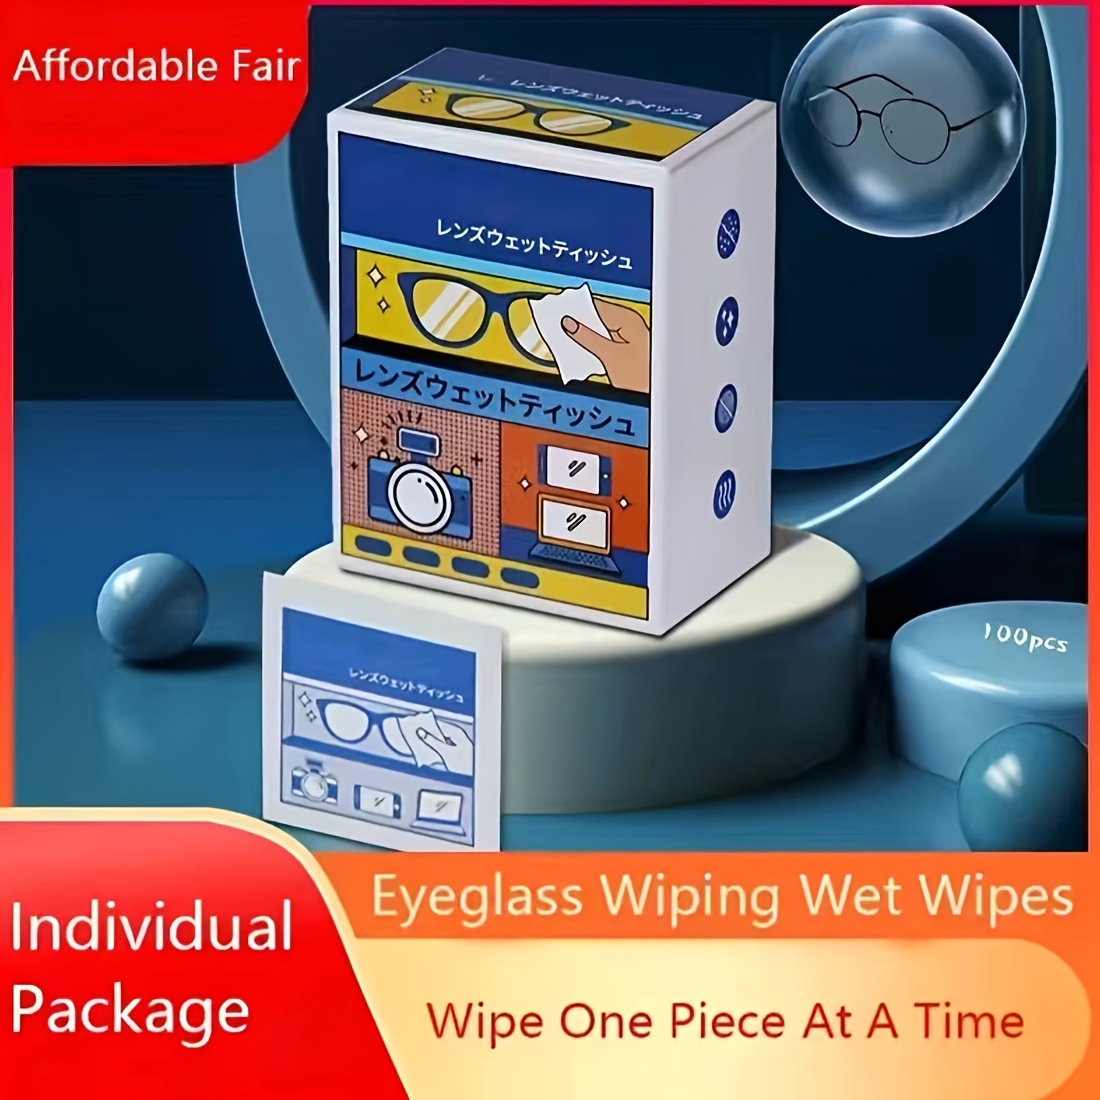 

20/100pcs Disposable Lenses And Lens Cleaning Wipes, Metal Jewelry Wipes, Anti-fog Wipes For Glasses, Mobile Phone Screens, And Glasses Cloth Wipes